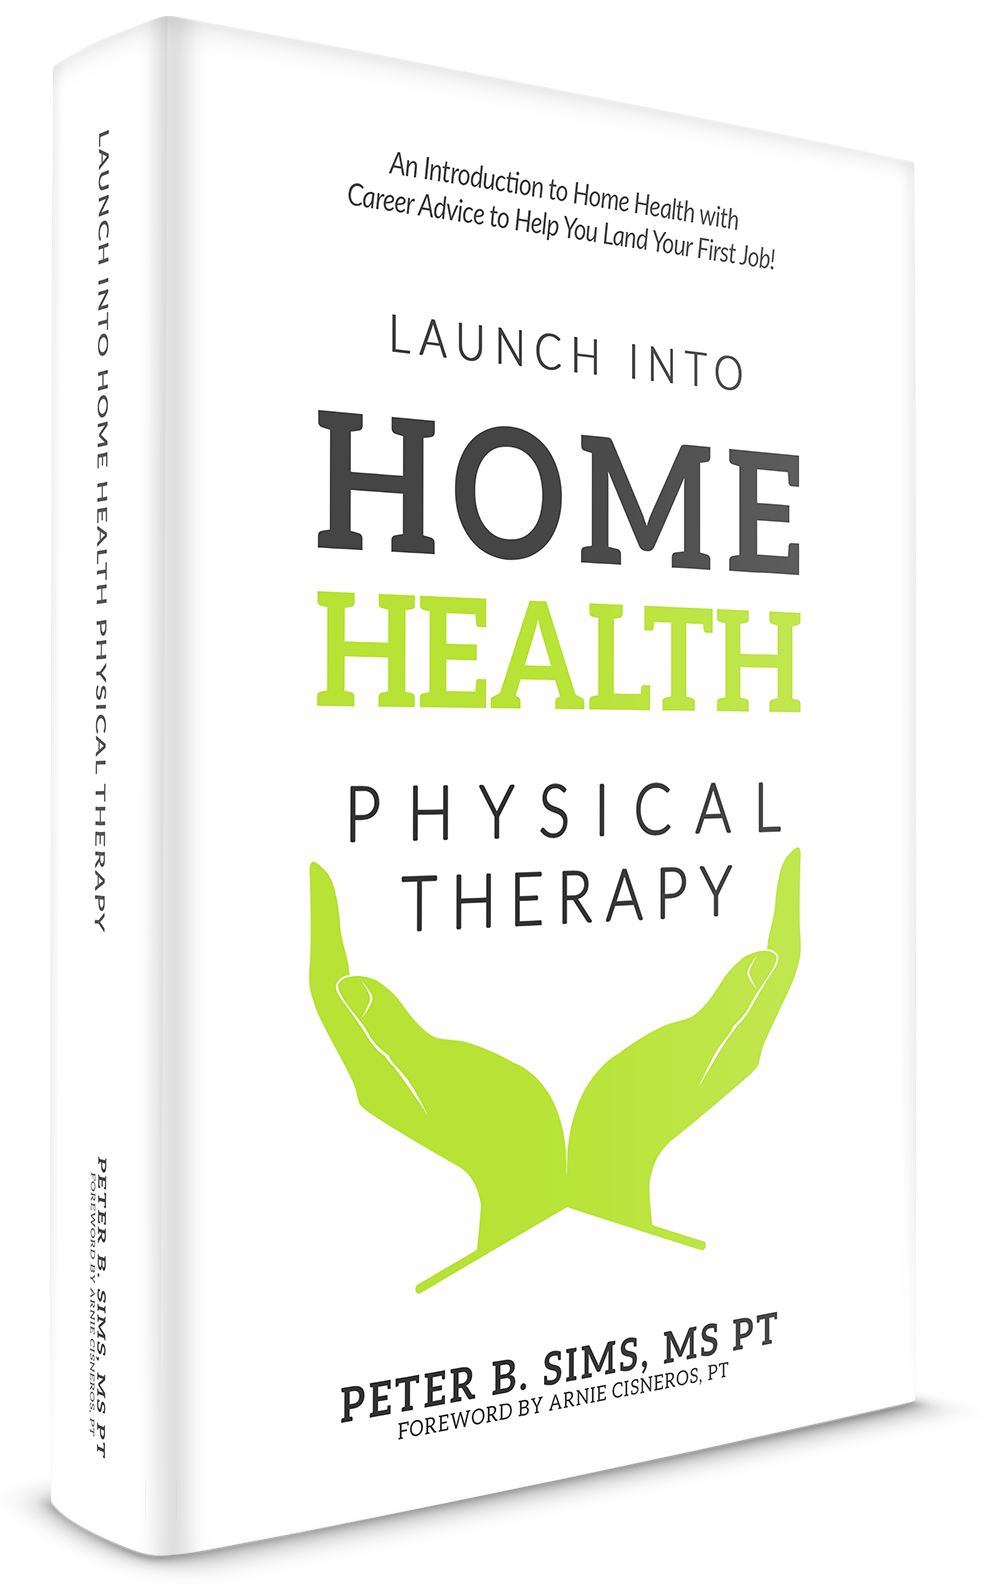 Launch into Home Health Physical Therapy by Peter B. Sims